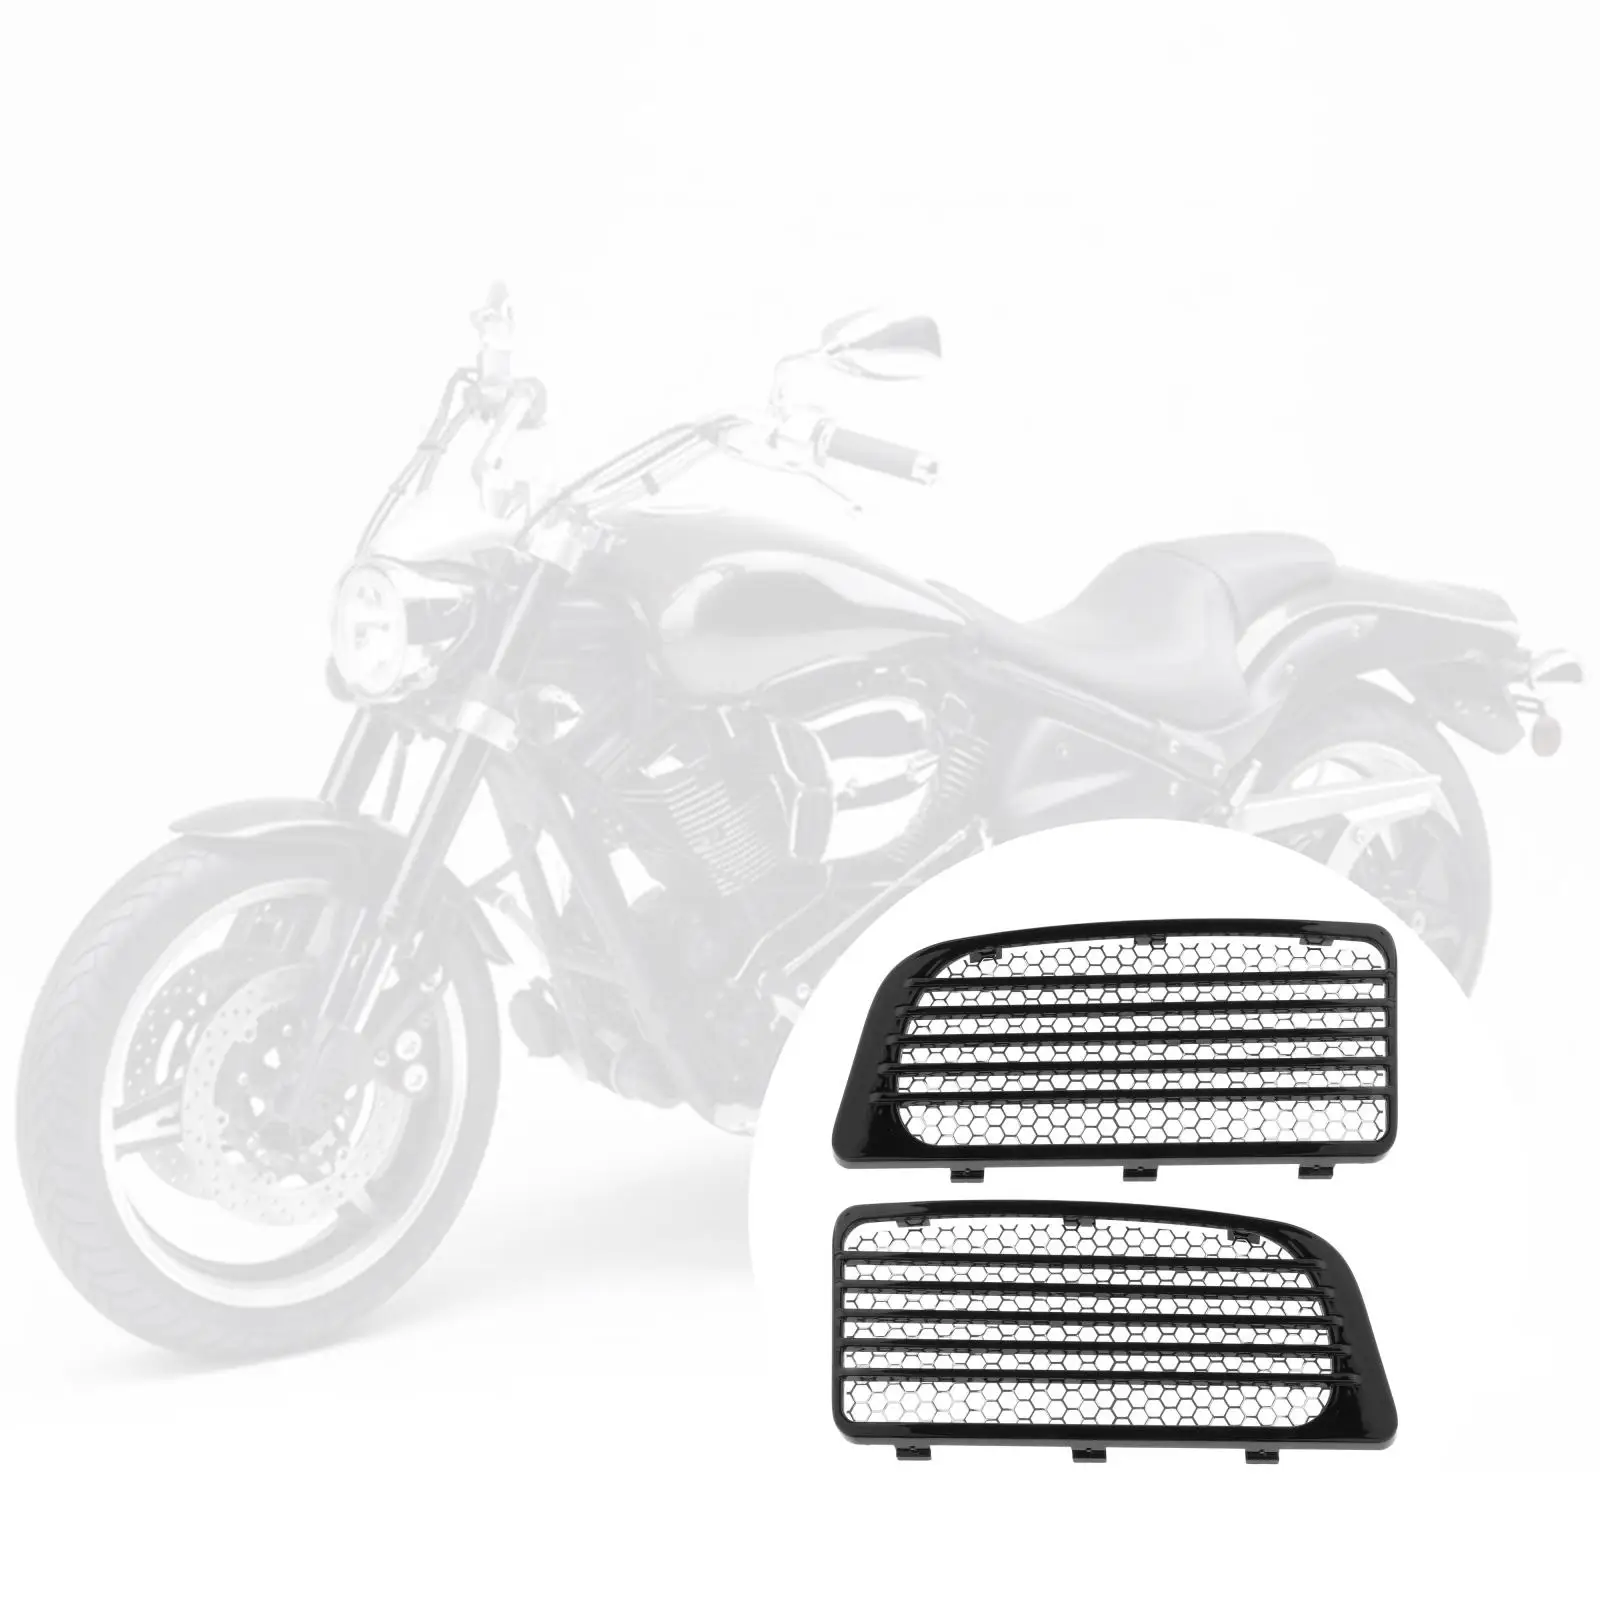 2pcs Motorcycle Radiator Grills w/ Metal Mesh Fit for Harley Touring Twin Cooled 14+ Replacement Parts Accessories